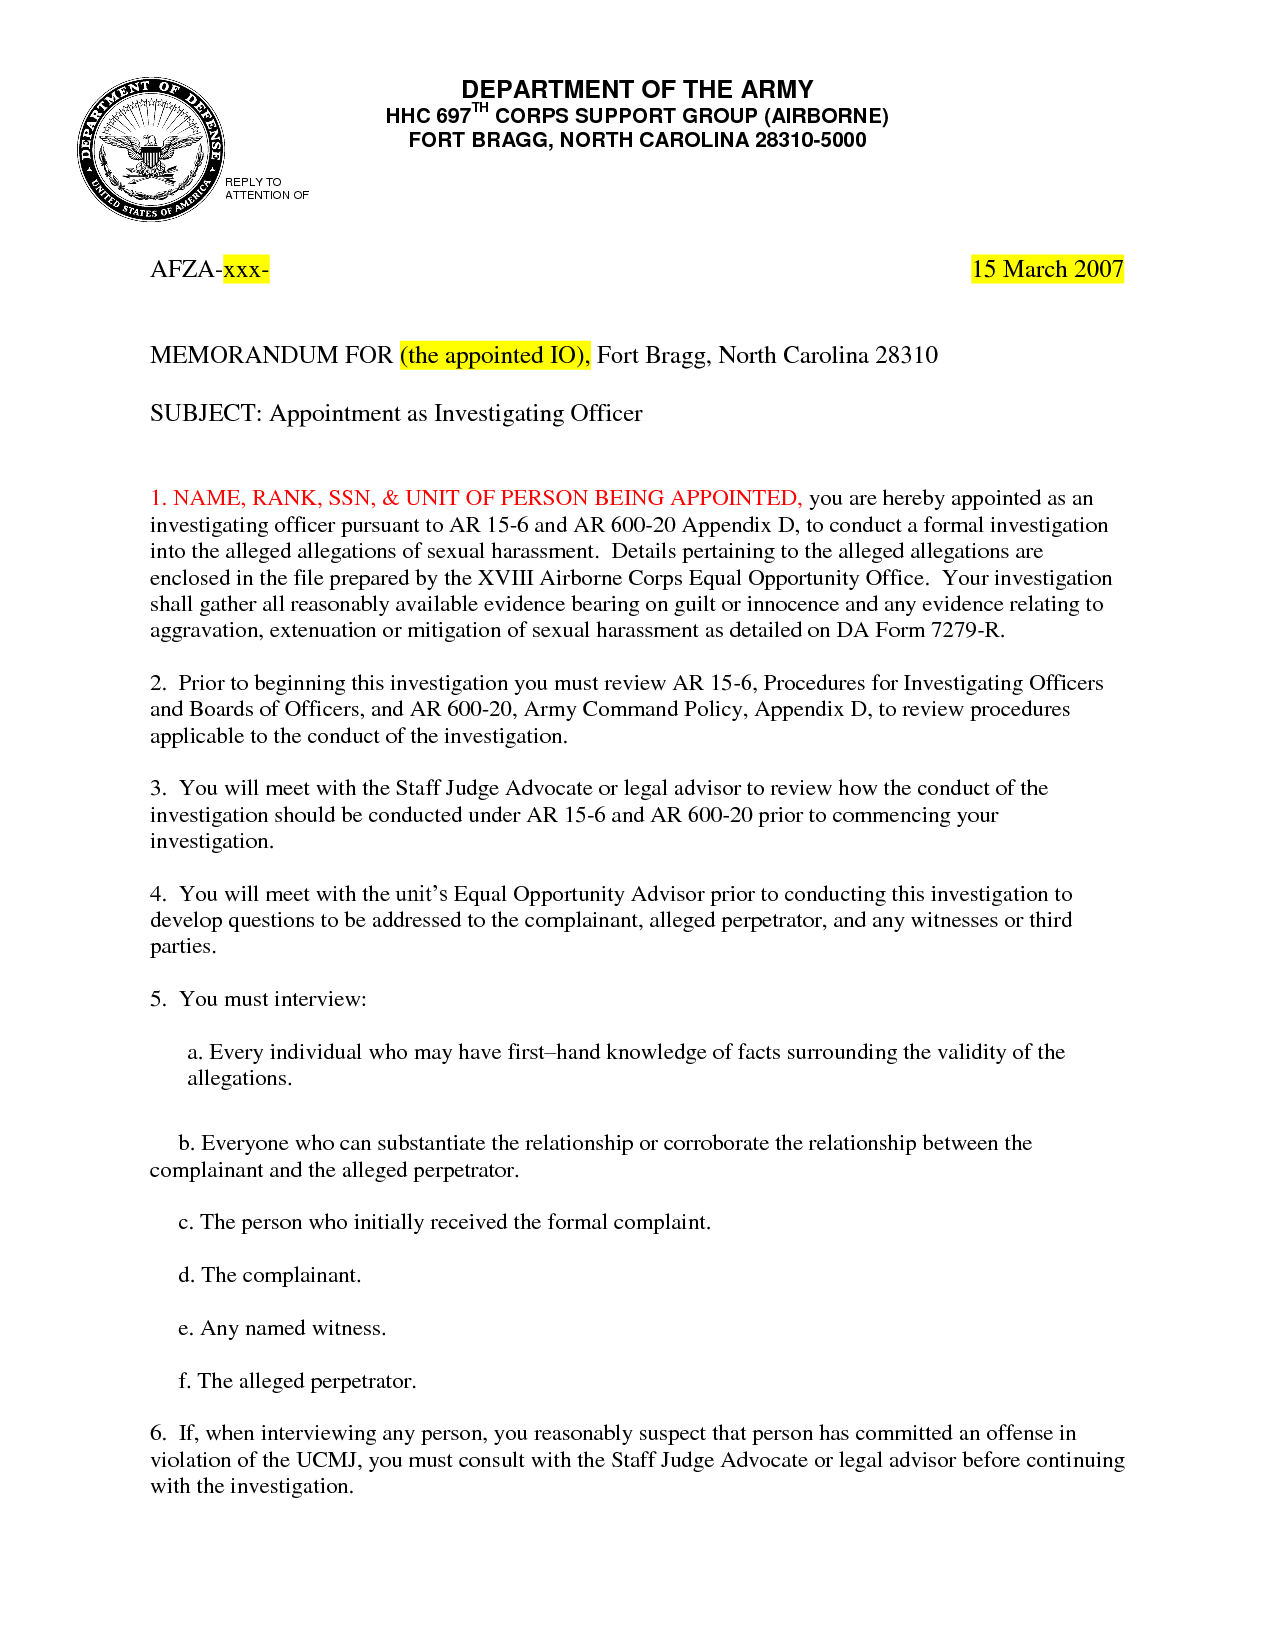 Army Memo Example Template | Free Cover Letter Templates Inside Army Memorandum Template Word